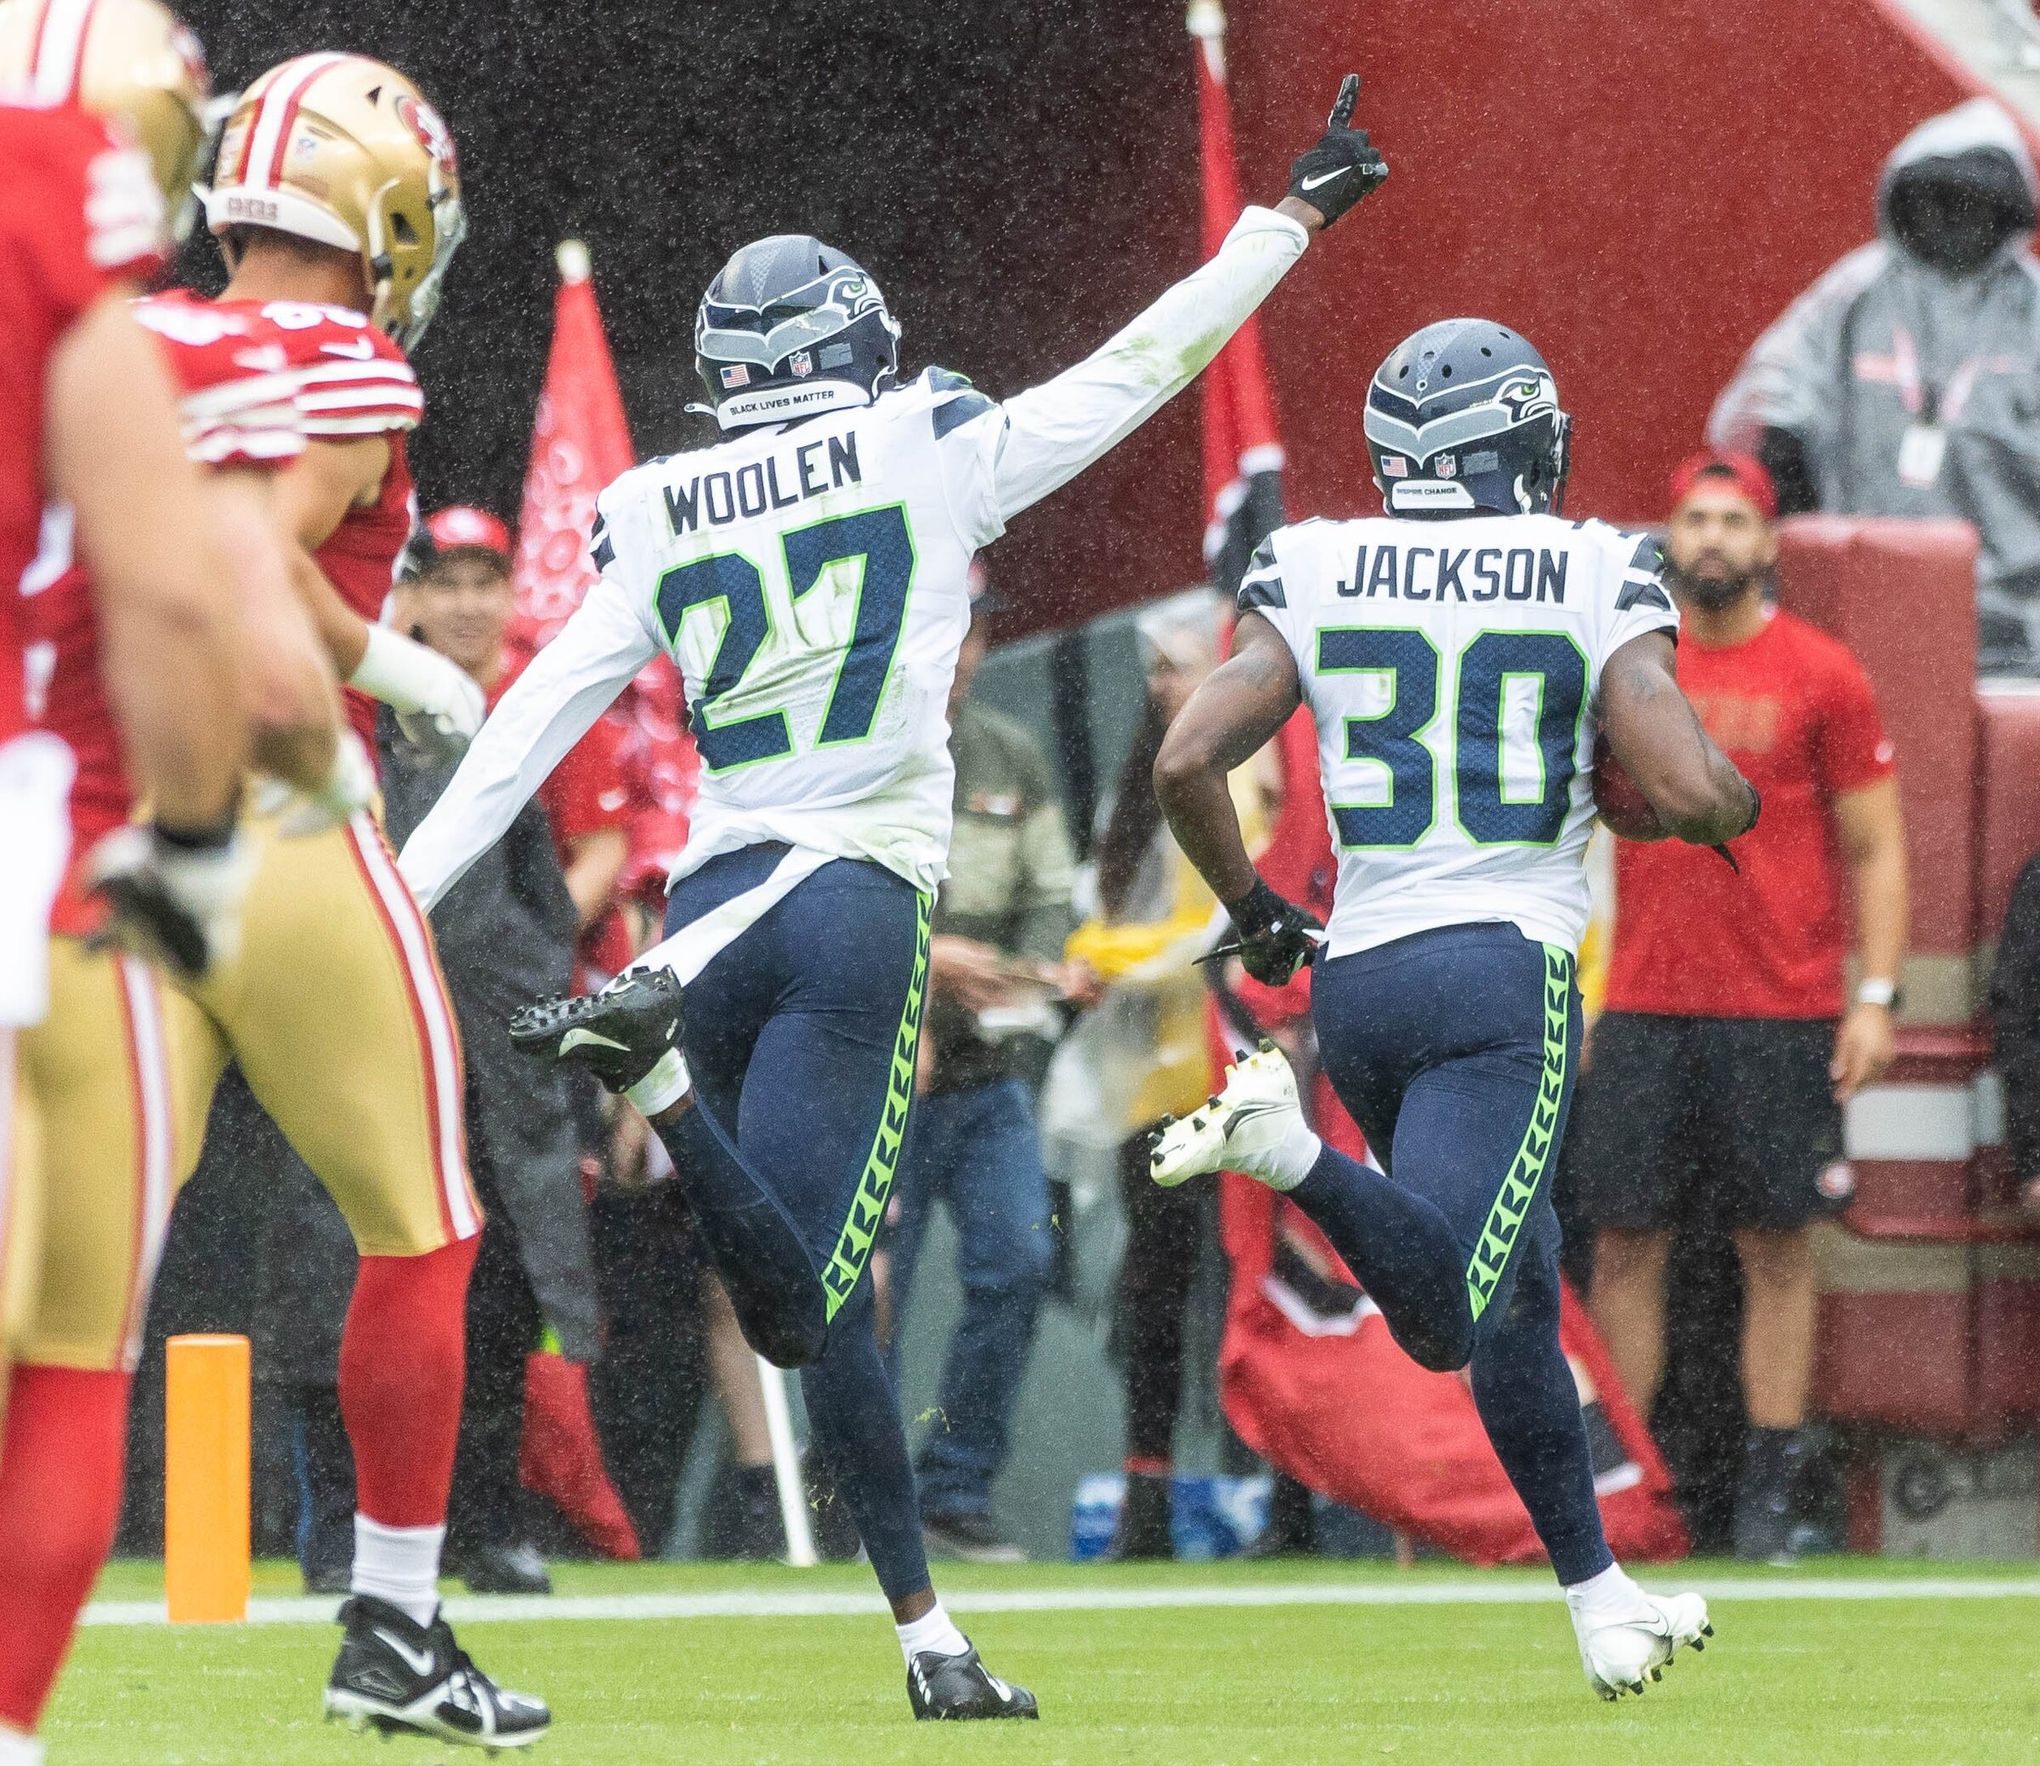 Seahawks collapse in 2nd half of playoff loss to 49ers - The Columbian